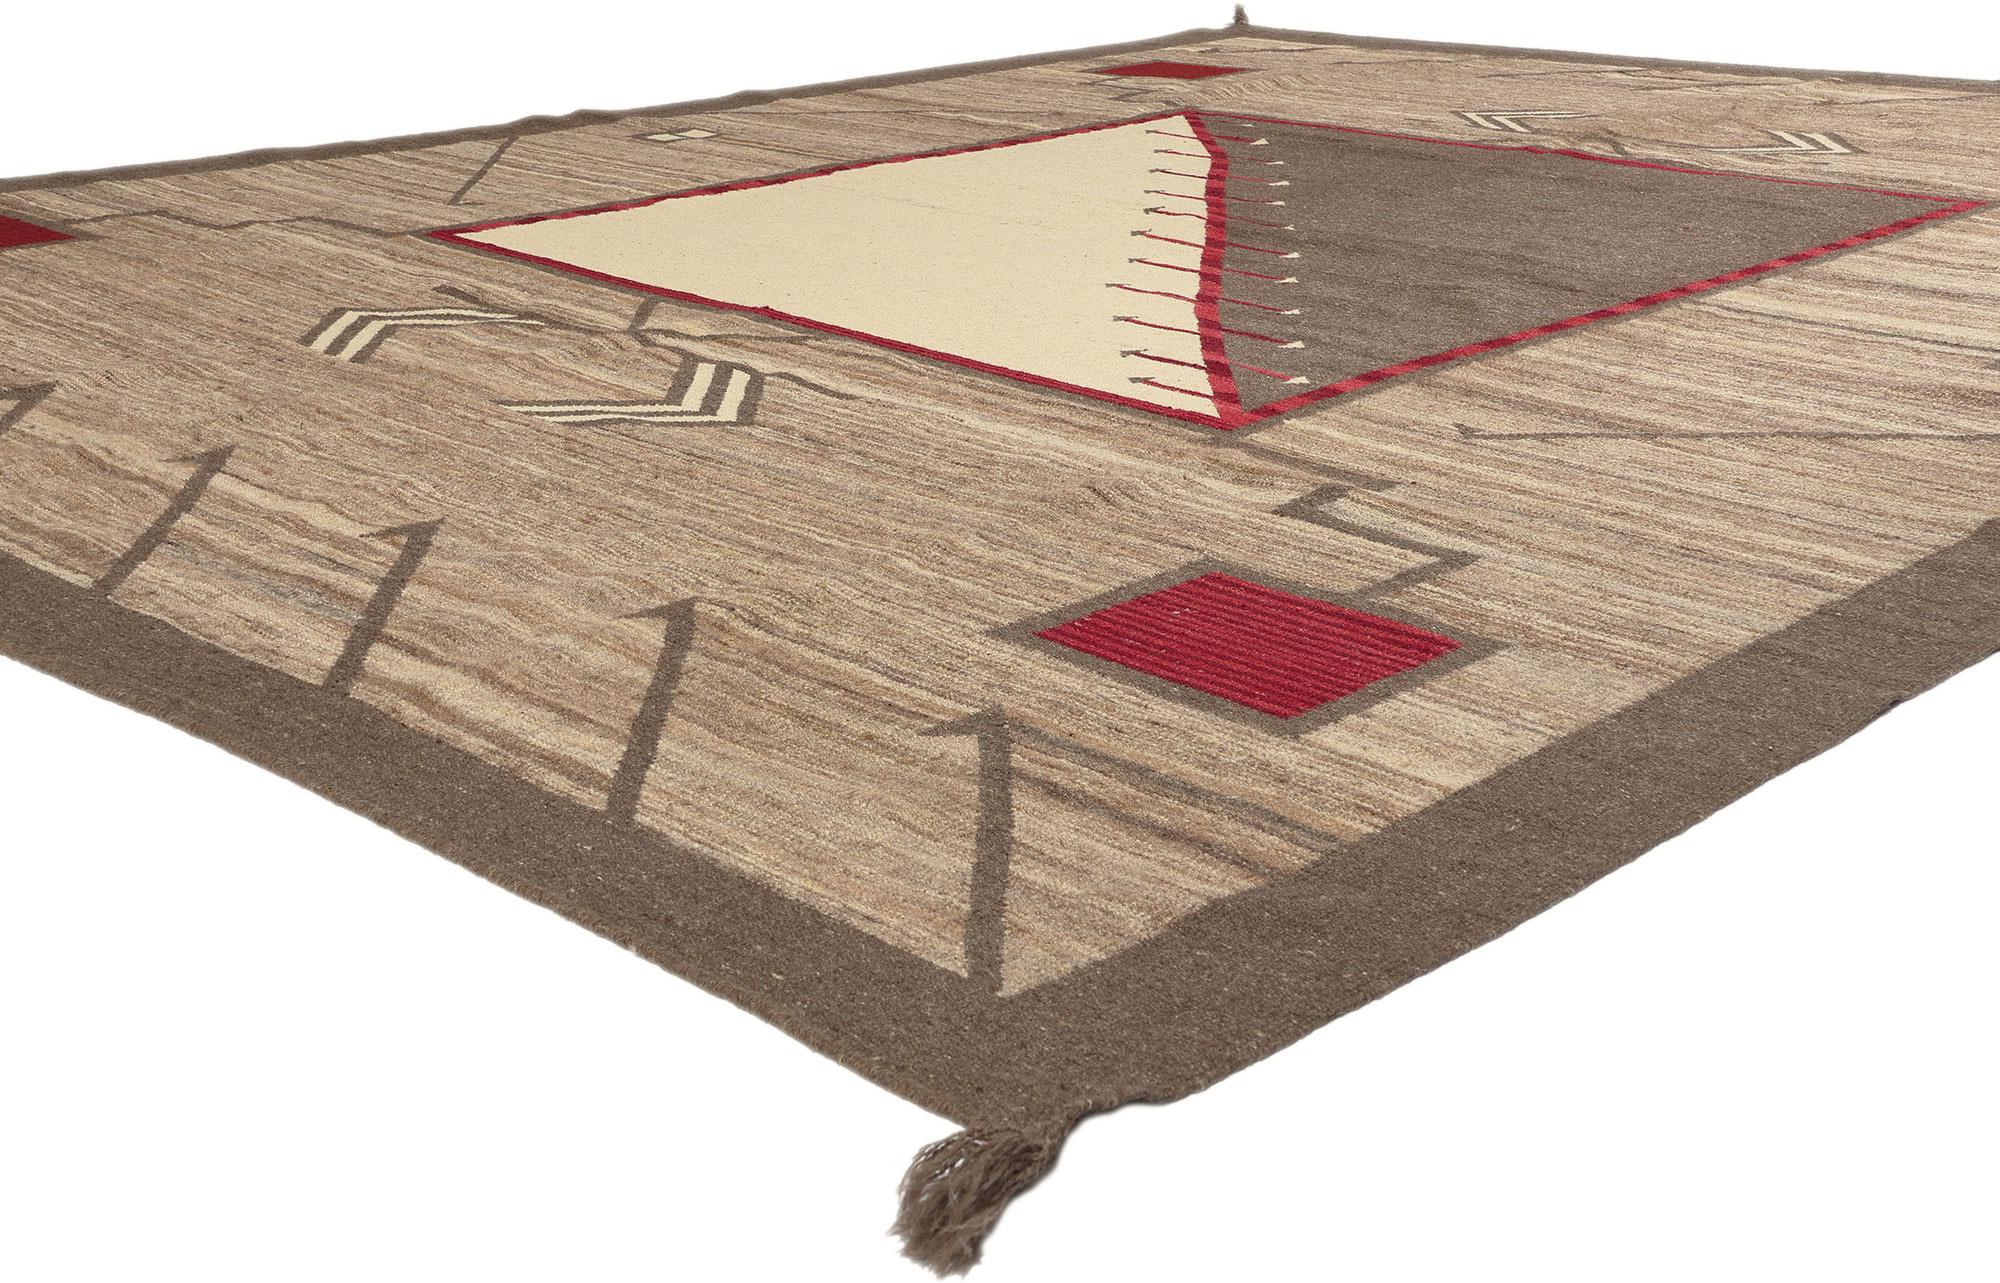 81035 Southwestern Navajo-Style Rug with Storm Pattern, 09'03 x 11'10. Step into the contemporary fusion of Native American design aesthetics and immerse yourself in the seamless blend of Southwestern and Desert Modern styles within this